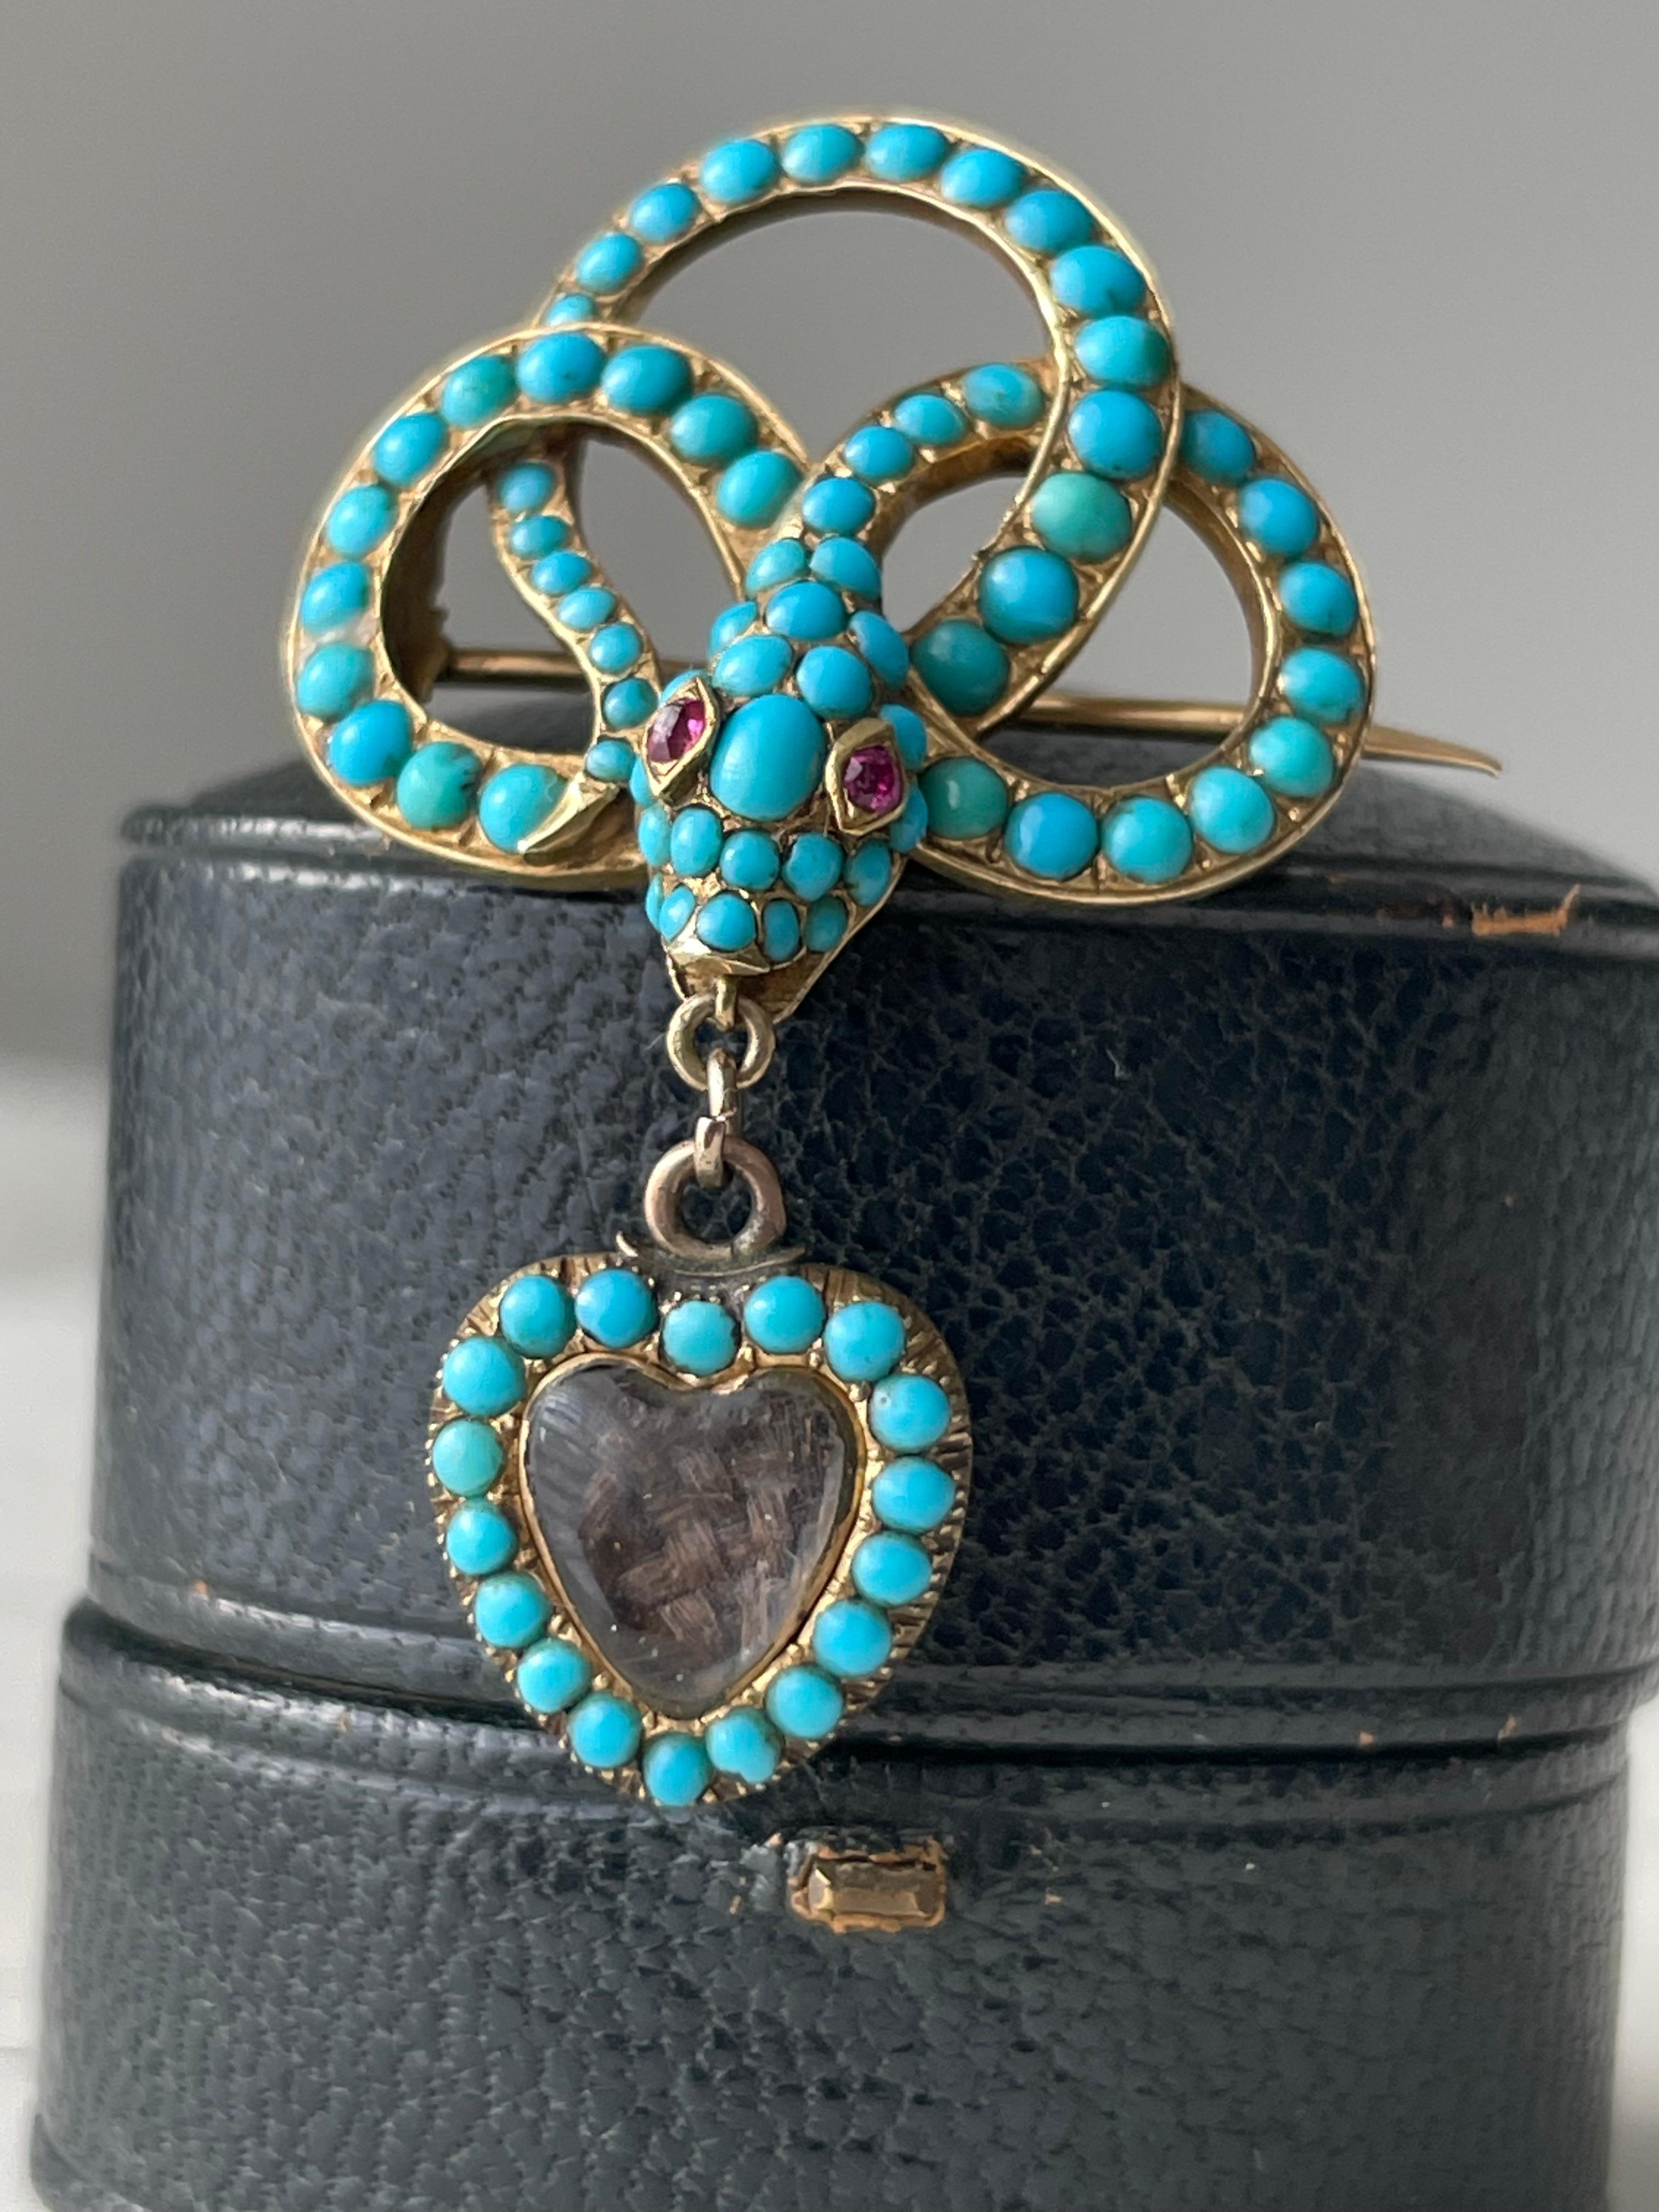 The serpent was a Victorian era symbol of everlasting love and devotion. Rendered in 15k gold, the body of this delightful coiled snake is pave-set with bright turquoise cabochons and accented with glowing ruby eyes. A tiny heart shaped charm